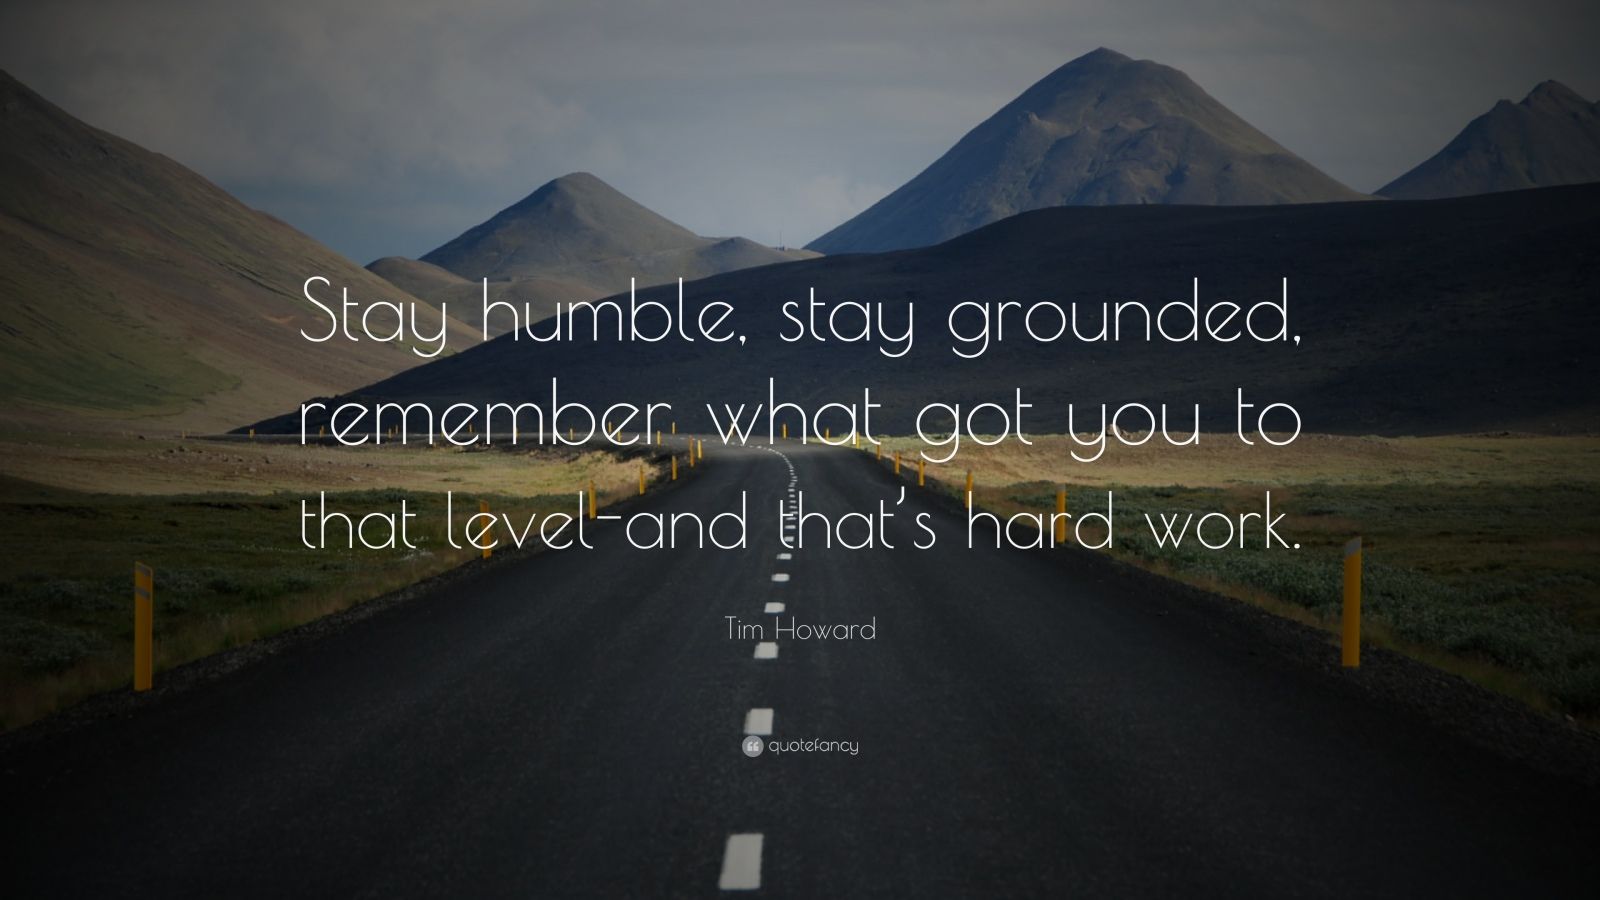 Tim Howard Quote: “Stay humble, stay grounded, remember what got you to